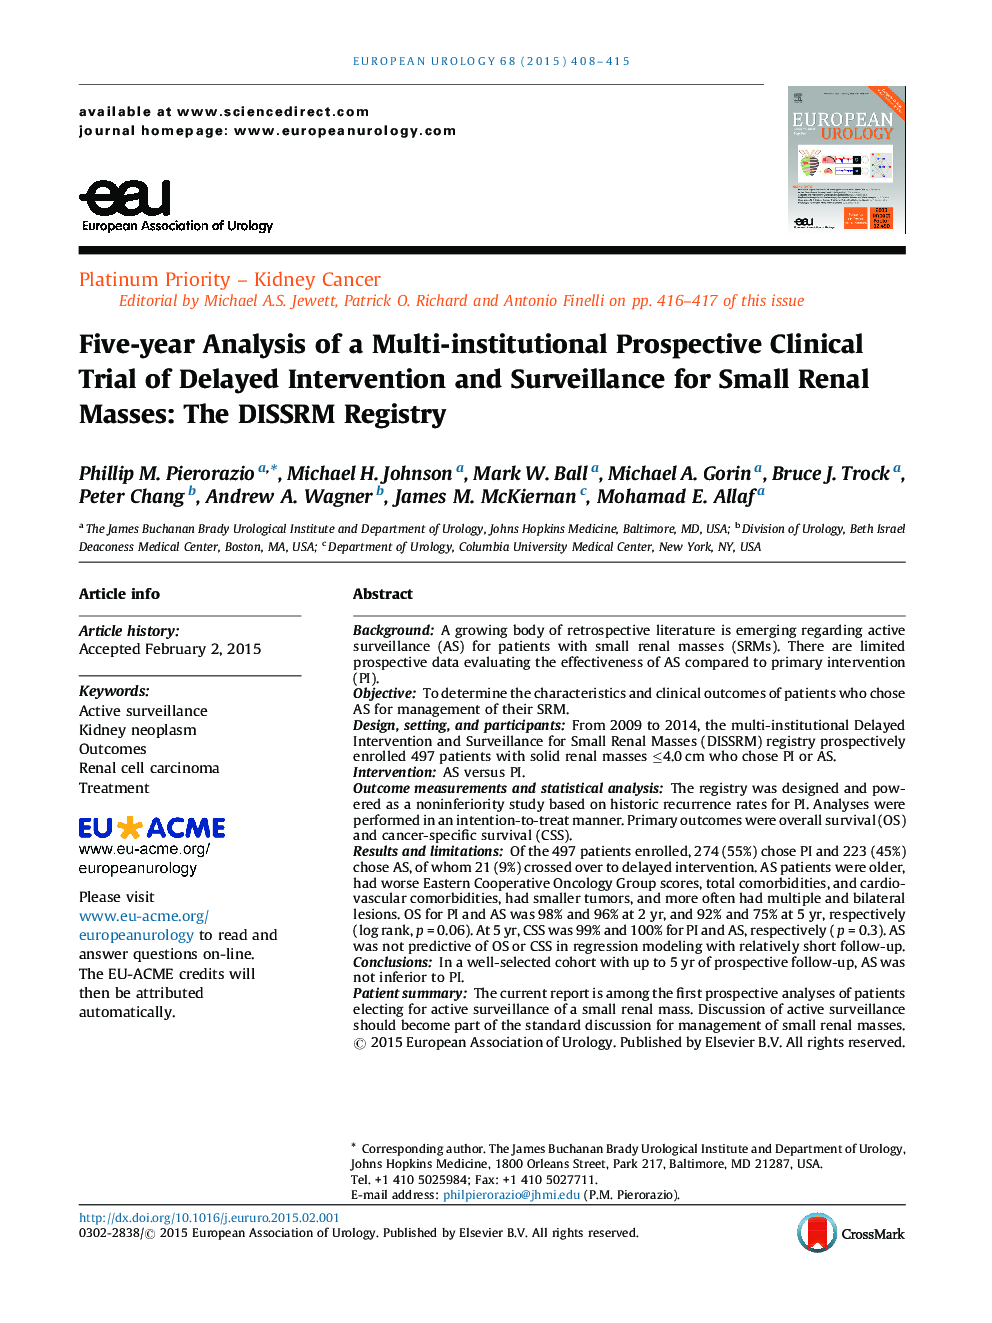 Five-year Analysis of a Multi-institutional Prospective Clinical Trial of Delayed Intervention and Surveillance for Small Renal Masses: The DISSRM Registry